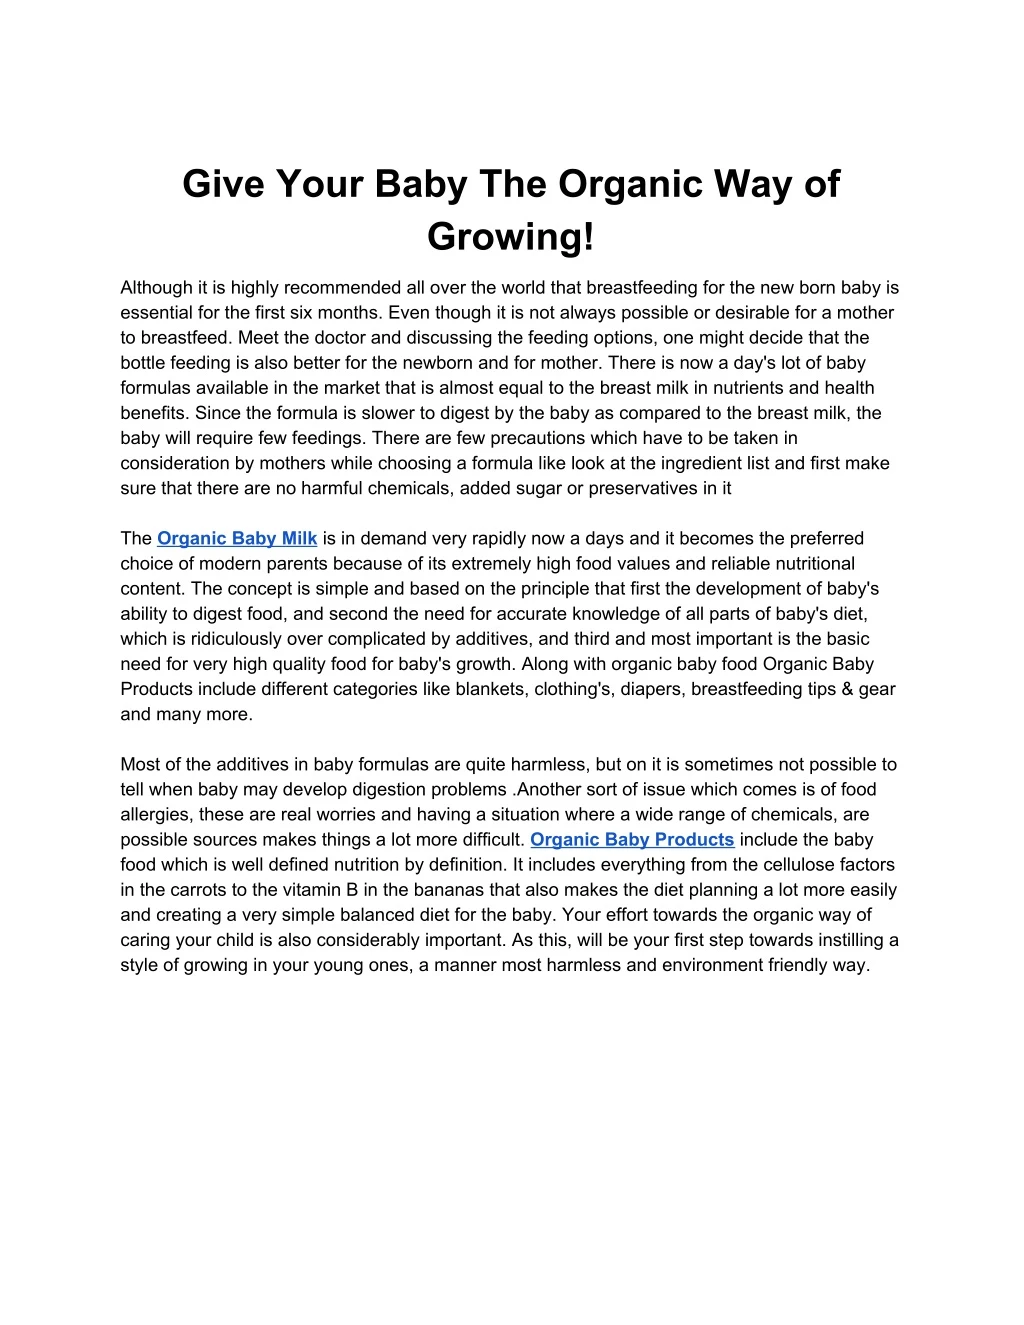 give your baby the organic way of growing